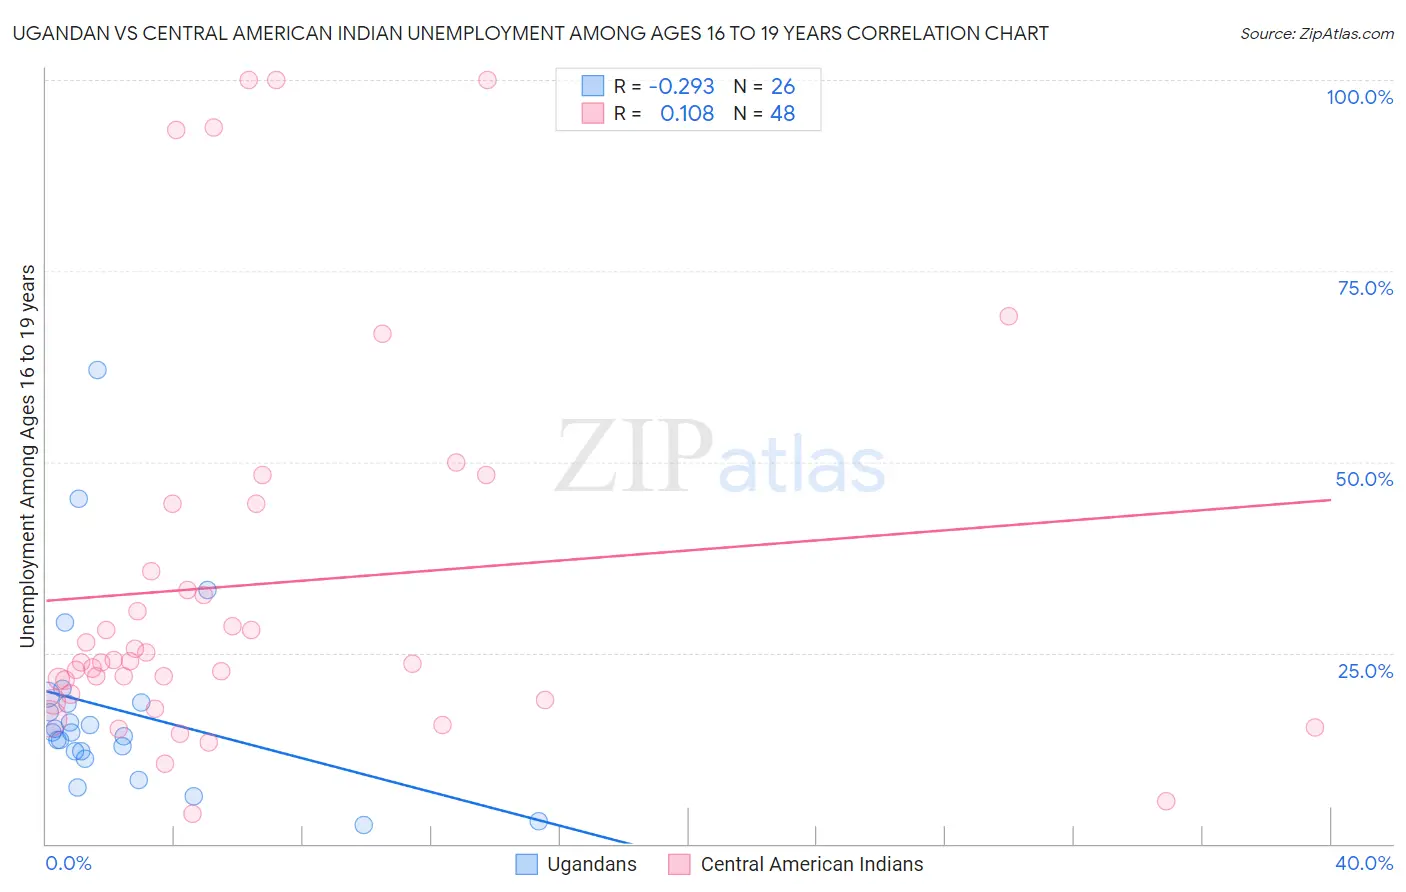 Ugandan vs Central American Indian Unemployment Among Ages 16 to 19 years